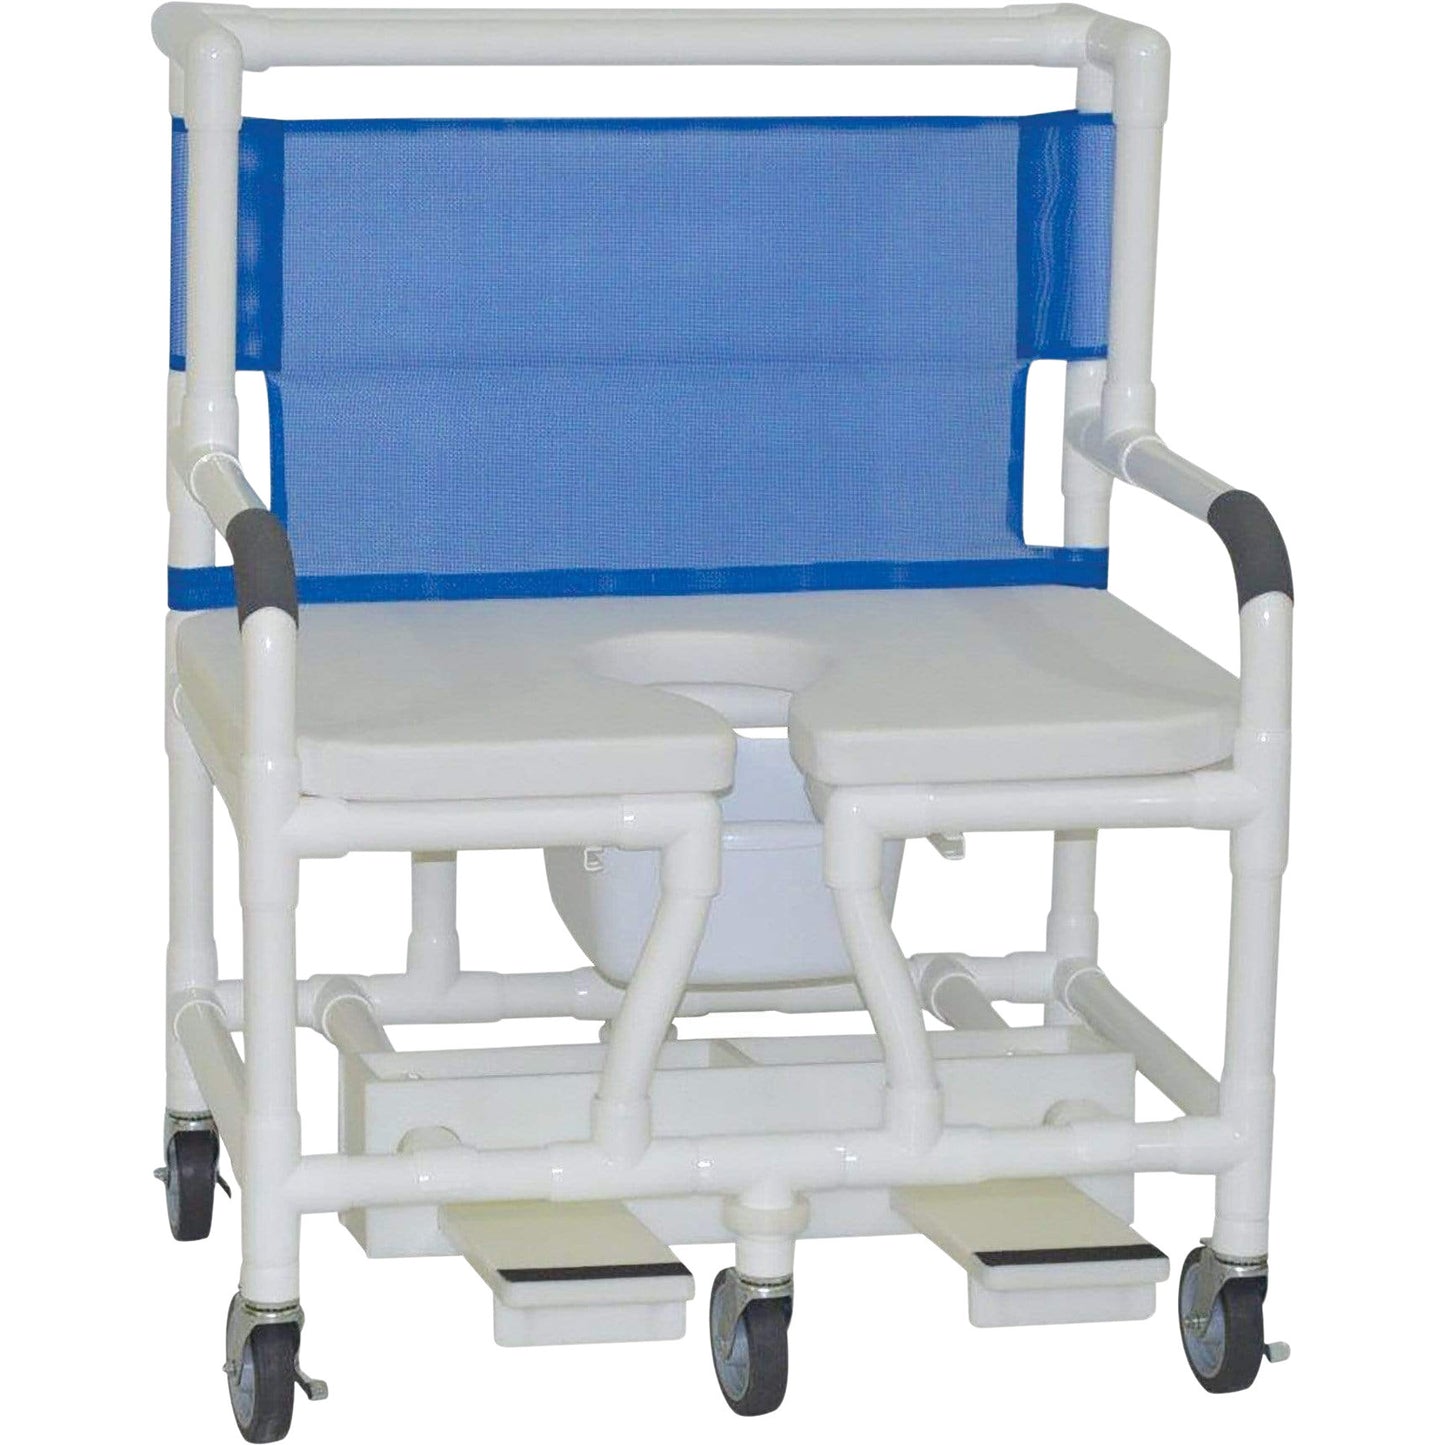 ConvaQuip Shower Chairs - PVC Bariatric Shower Chair With Soft Seat Deluxe Elongated Model 131-5-SSDE by ConvaQuip